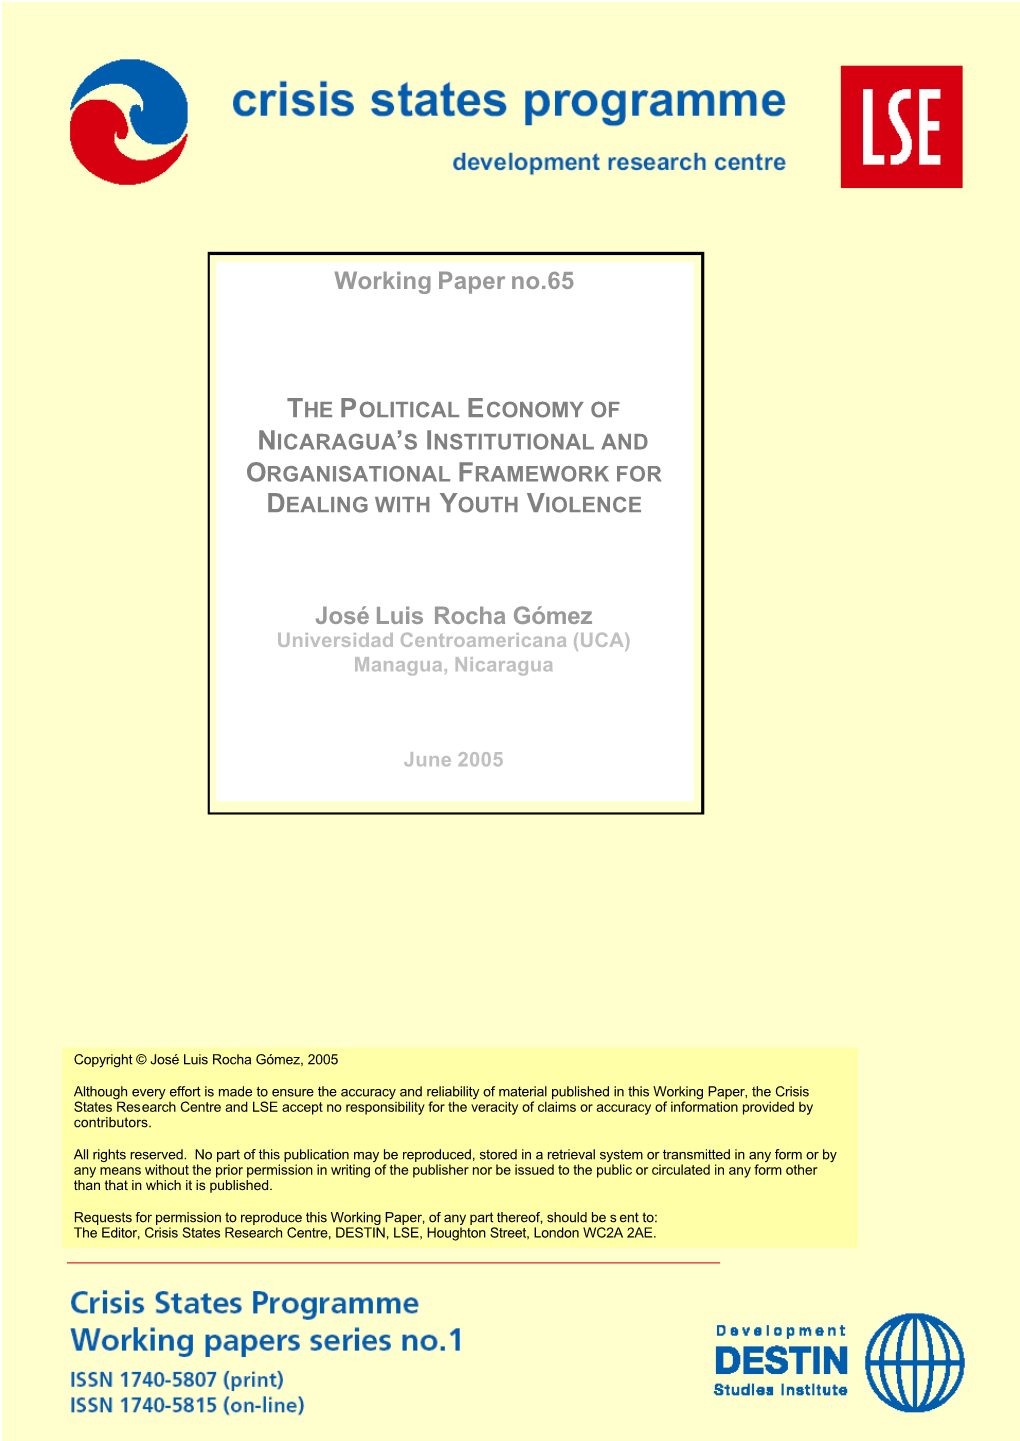 The Political Economy of Nicaragua's Institutional and Organisational